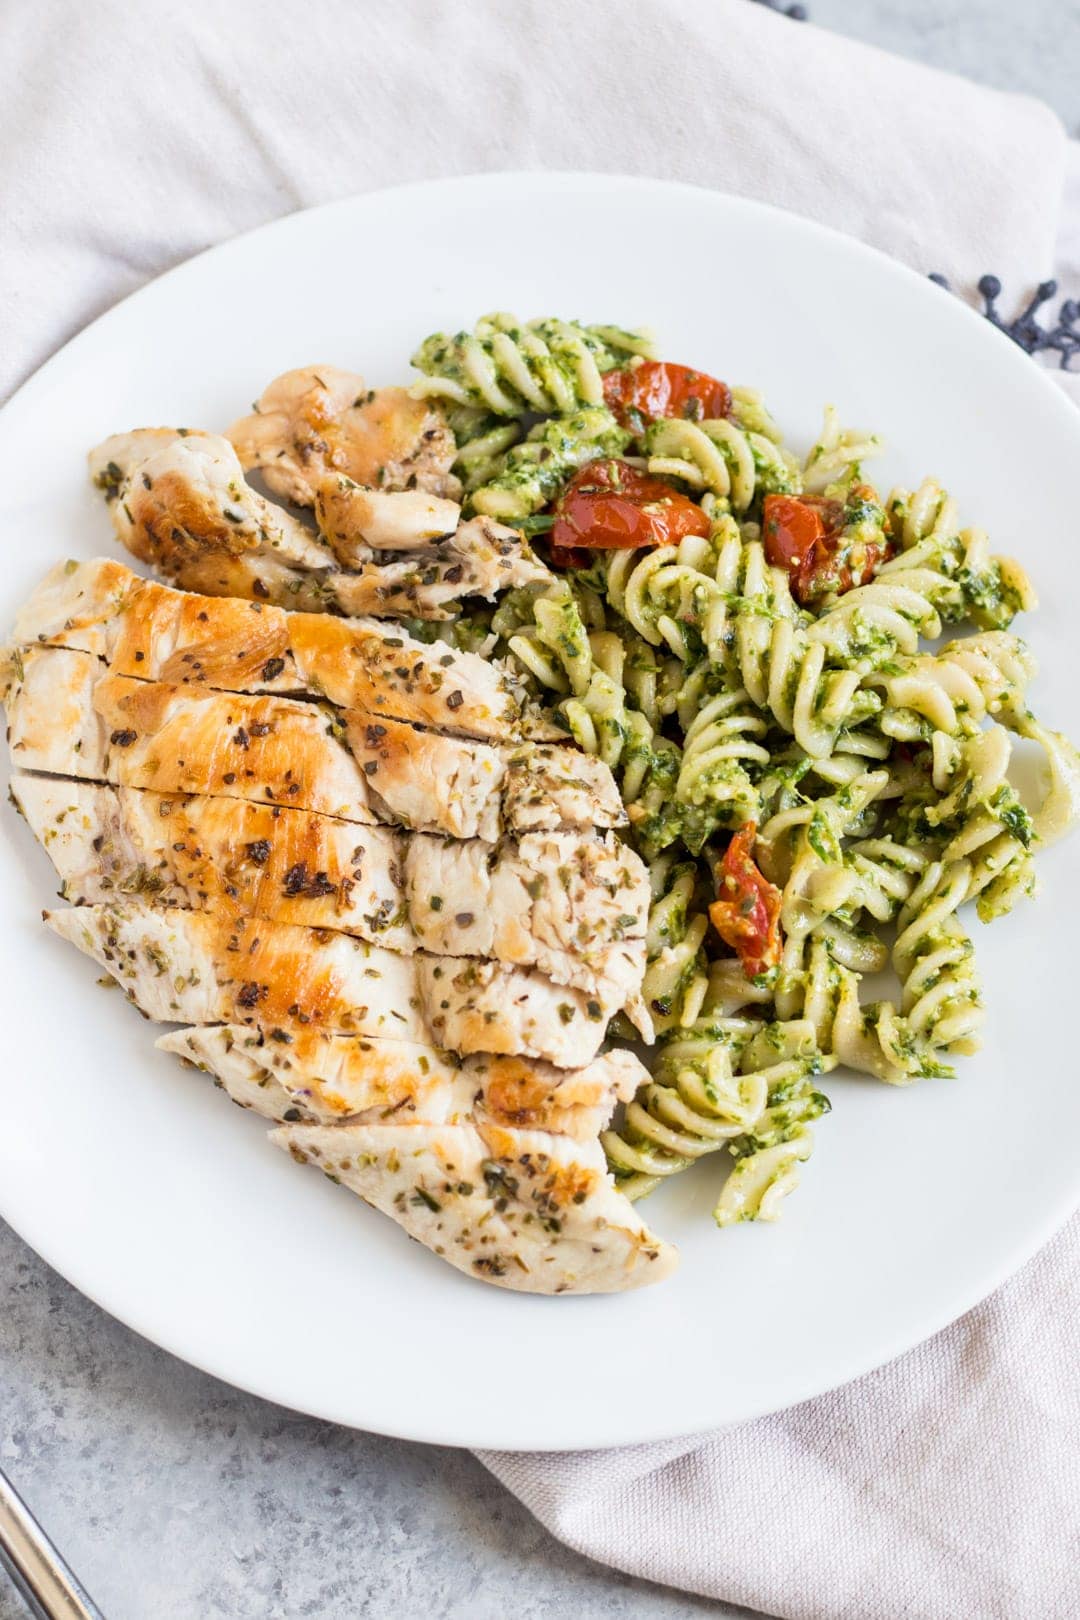 A plate of pesto-tossed pasta, grilled chicken and roasted tomatoes.